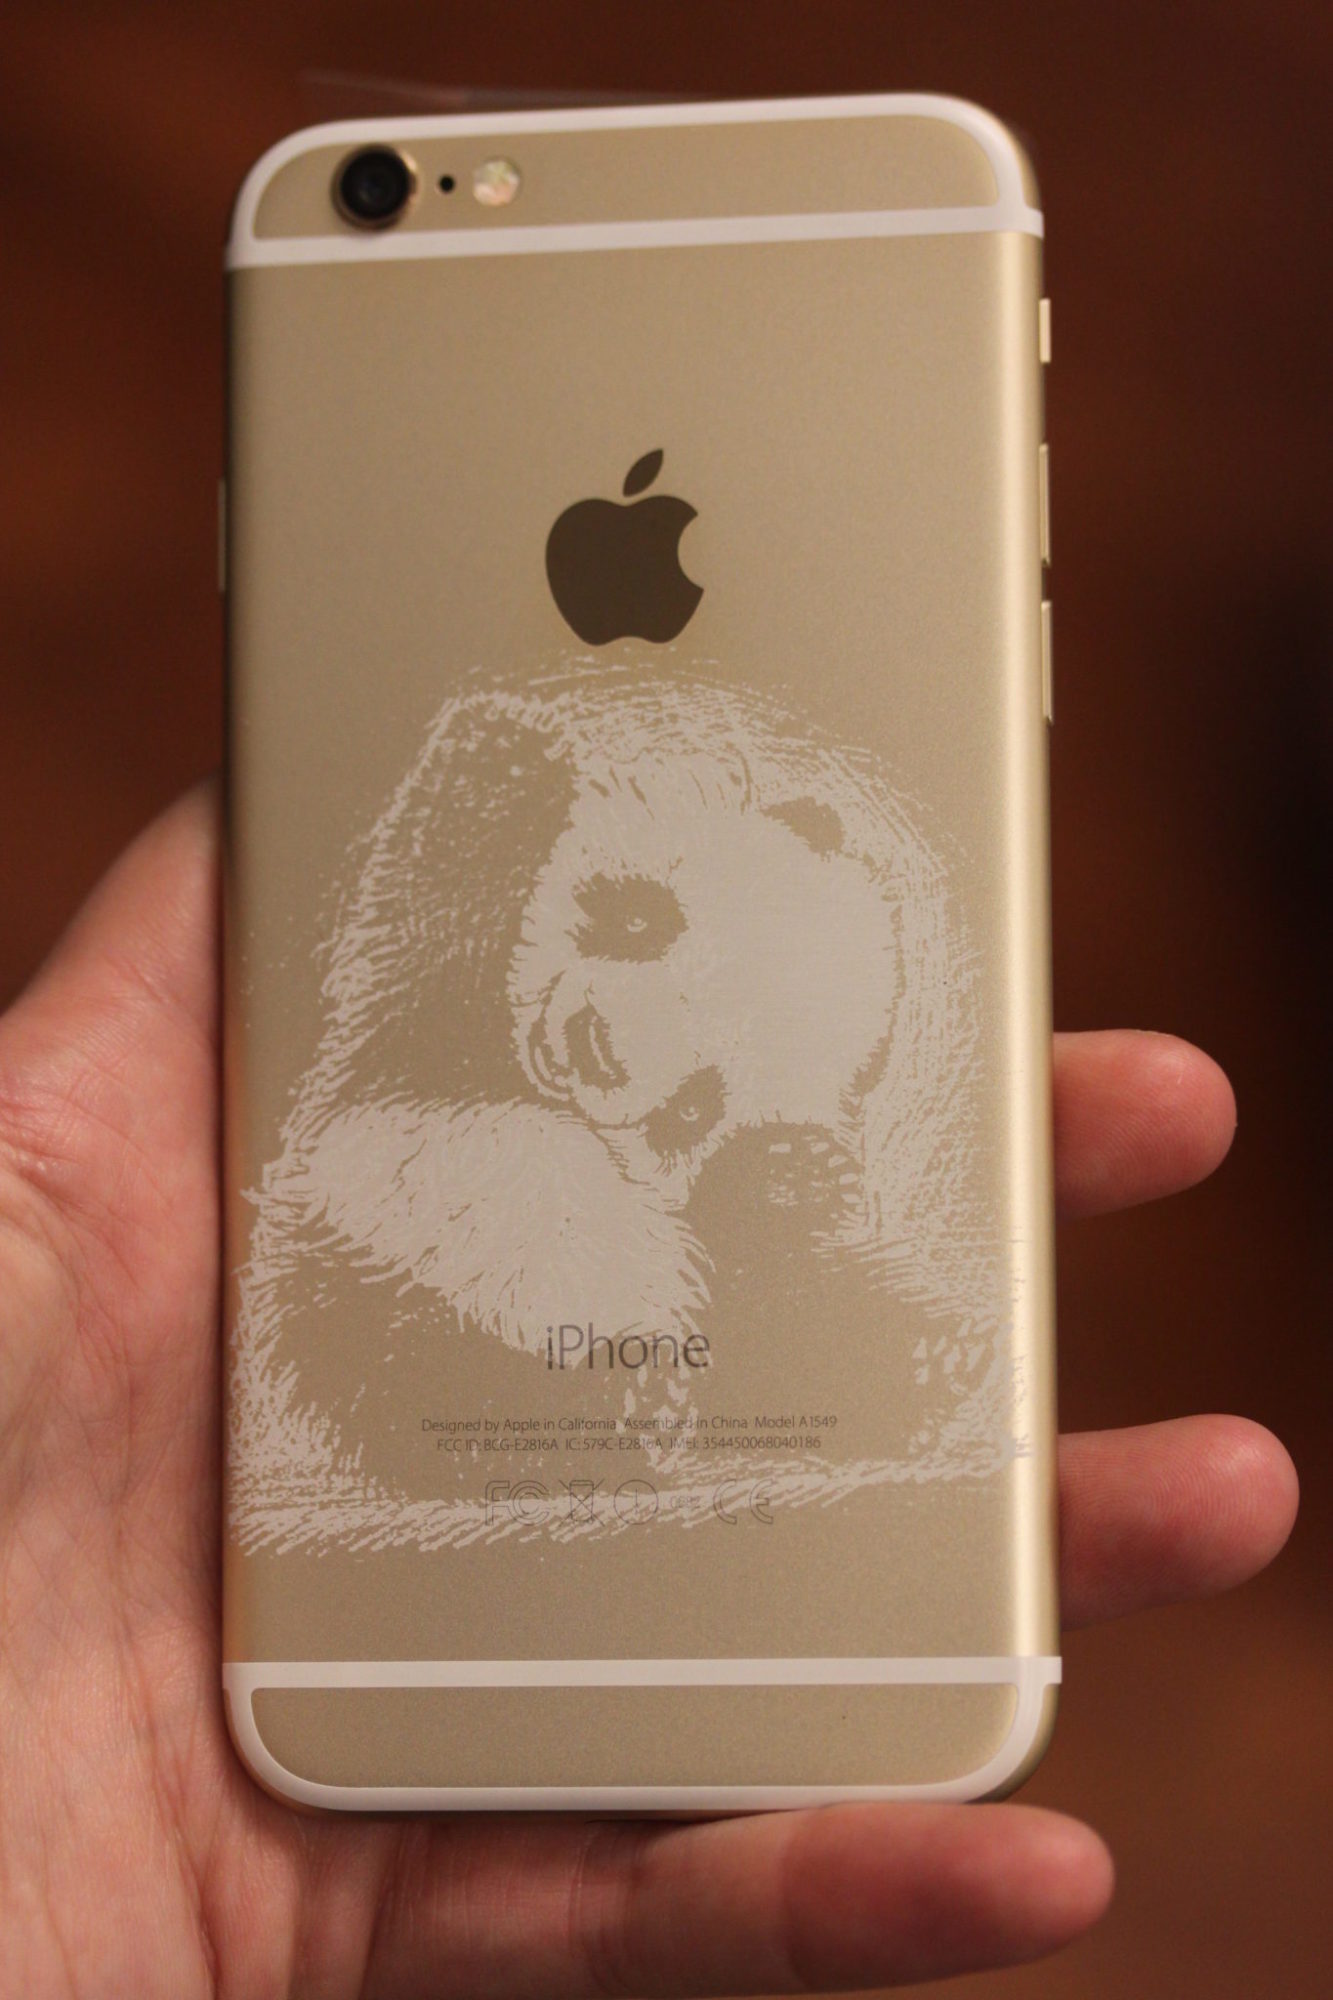 Engraving Apple's Gold iPads, iPhones, and MacBooks 3